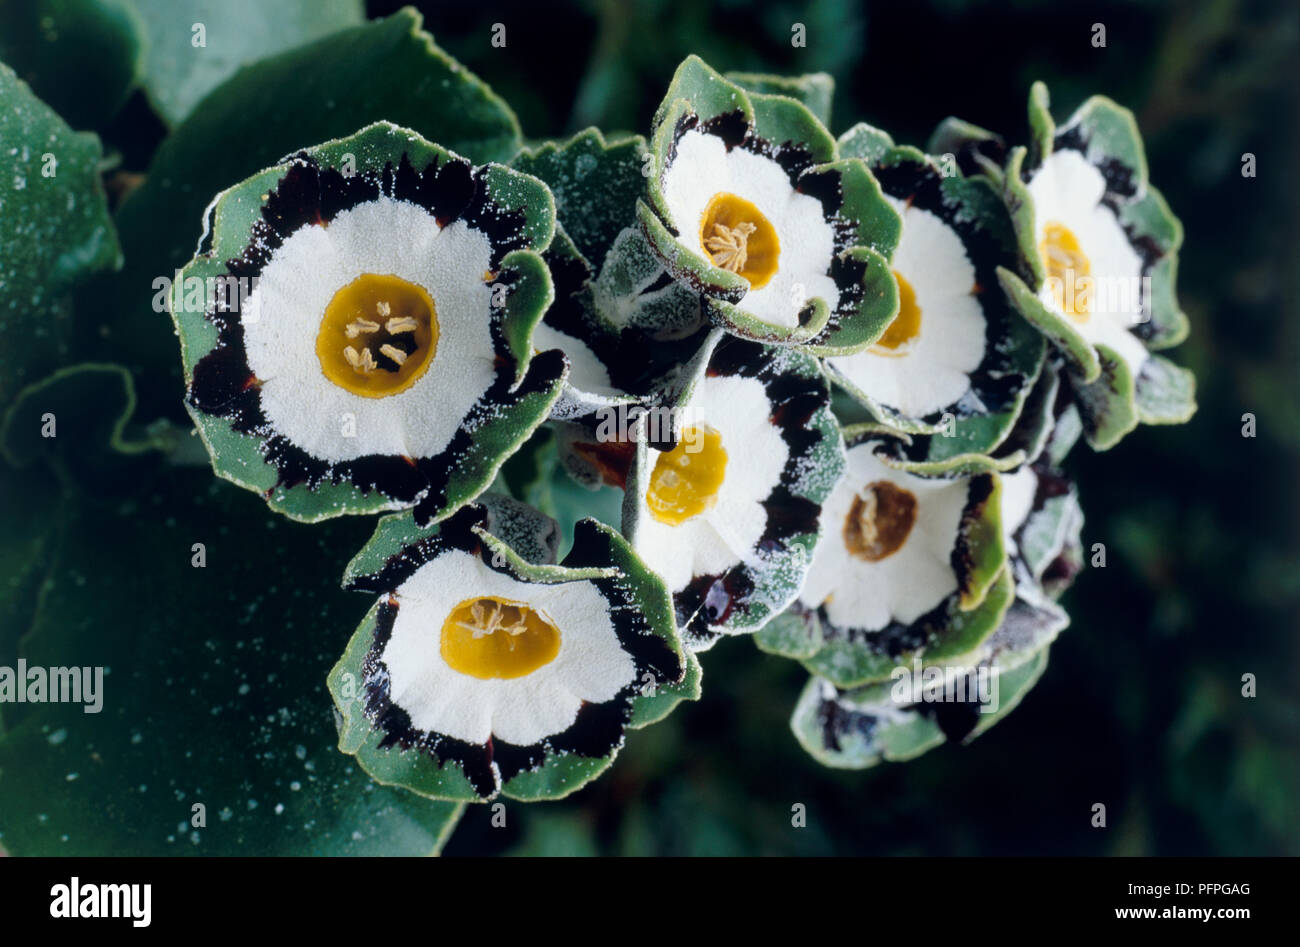 Primula auricula 'Beechen Green' (Auricula), cluster of flowers, close-up Stock Photo